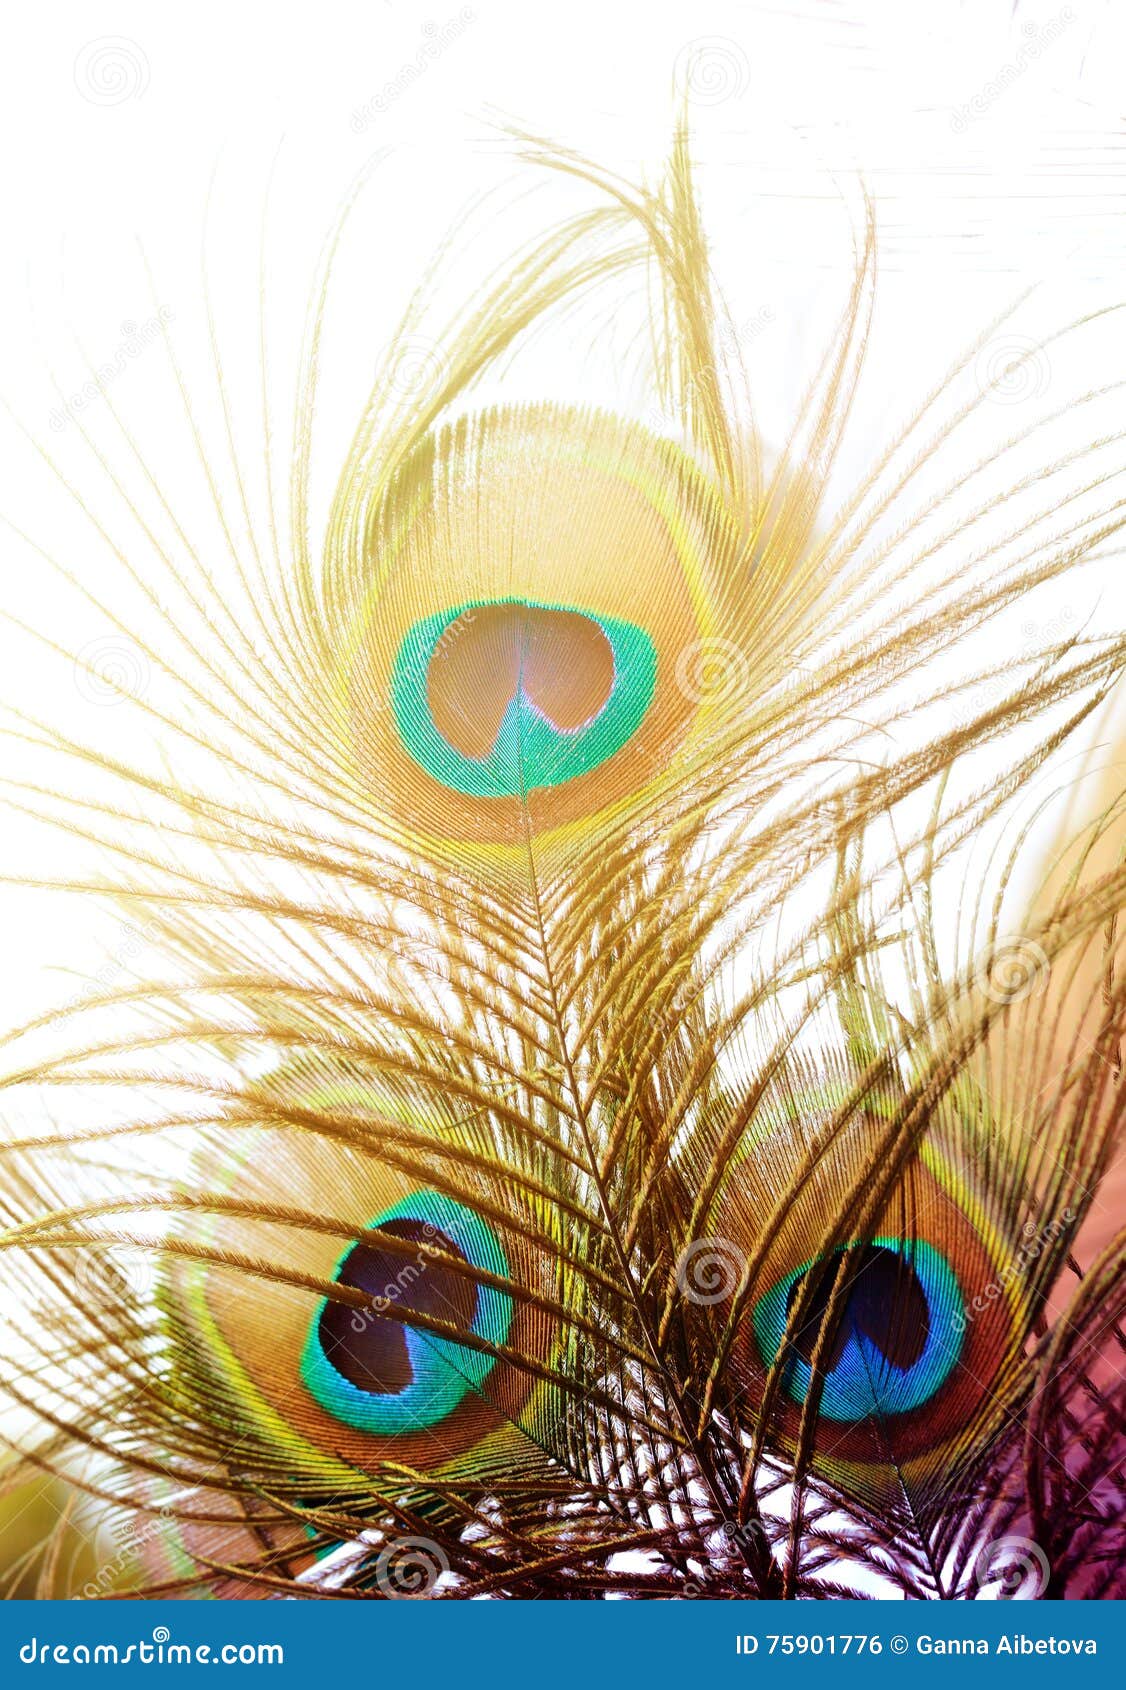 Beautiful Peacock Feathers. Bird Feather Background Stock Photo - Image ...